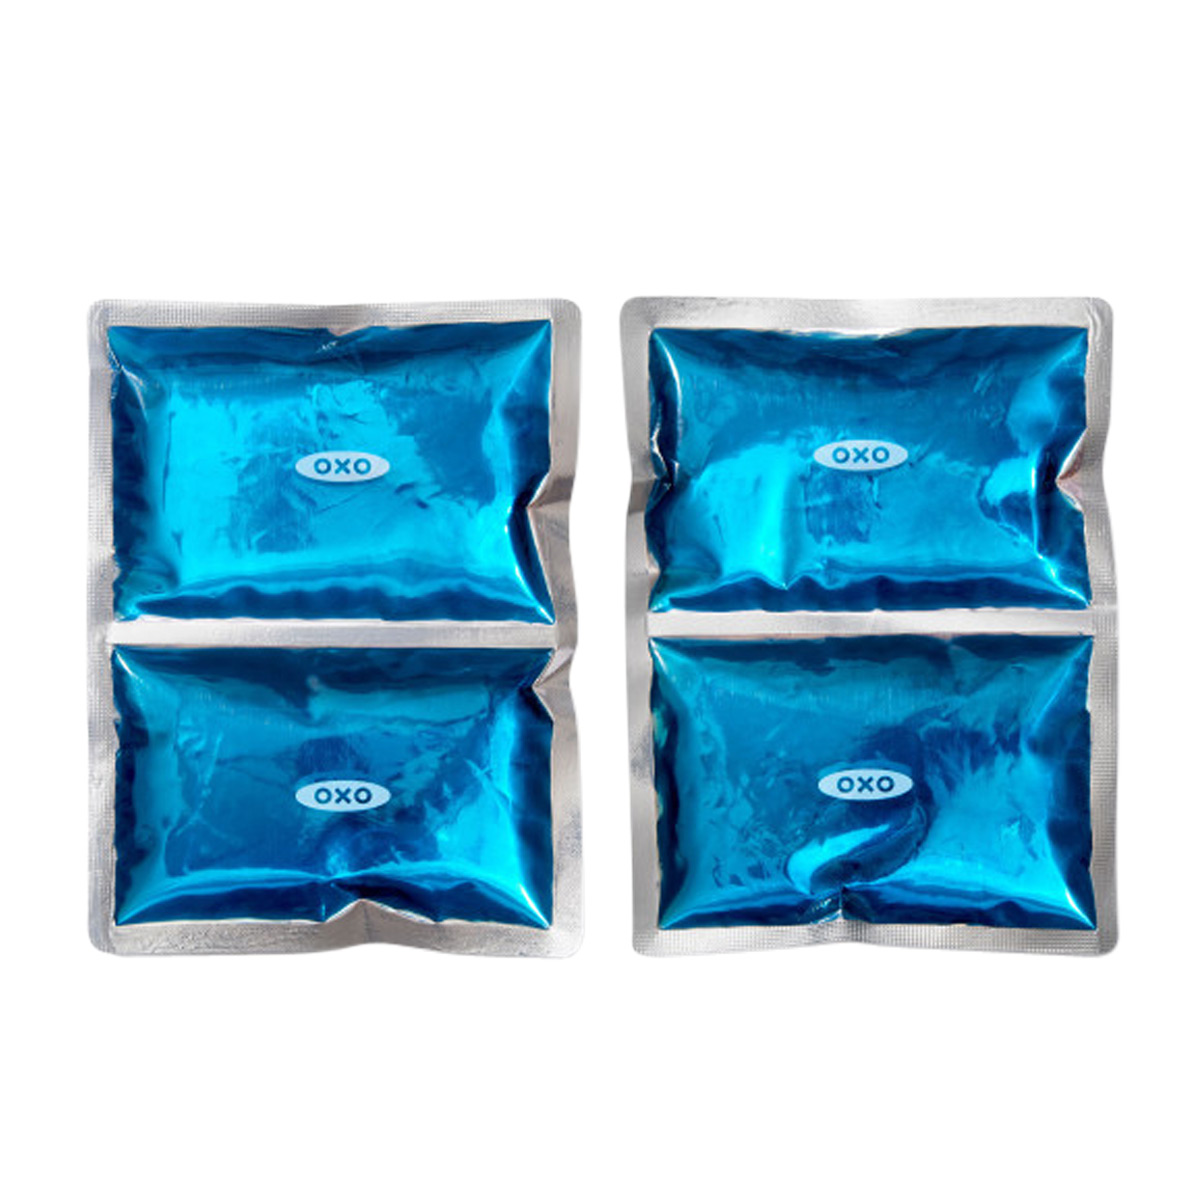 https://www.containerstore.com/catalogimages/423172/10085073-Icepack-VEN.jpg